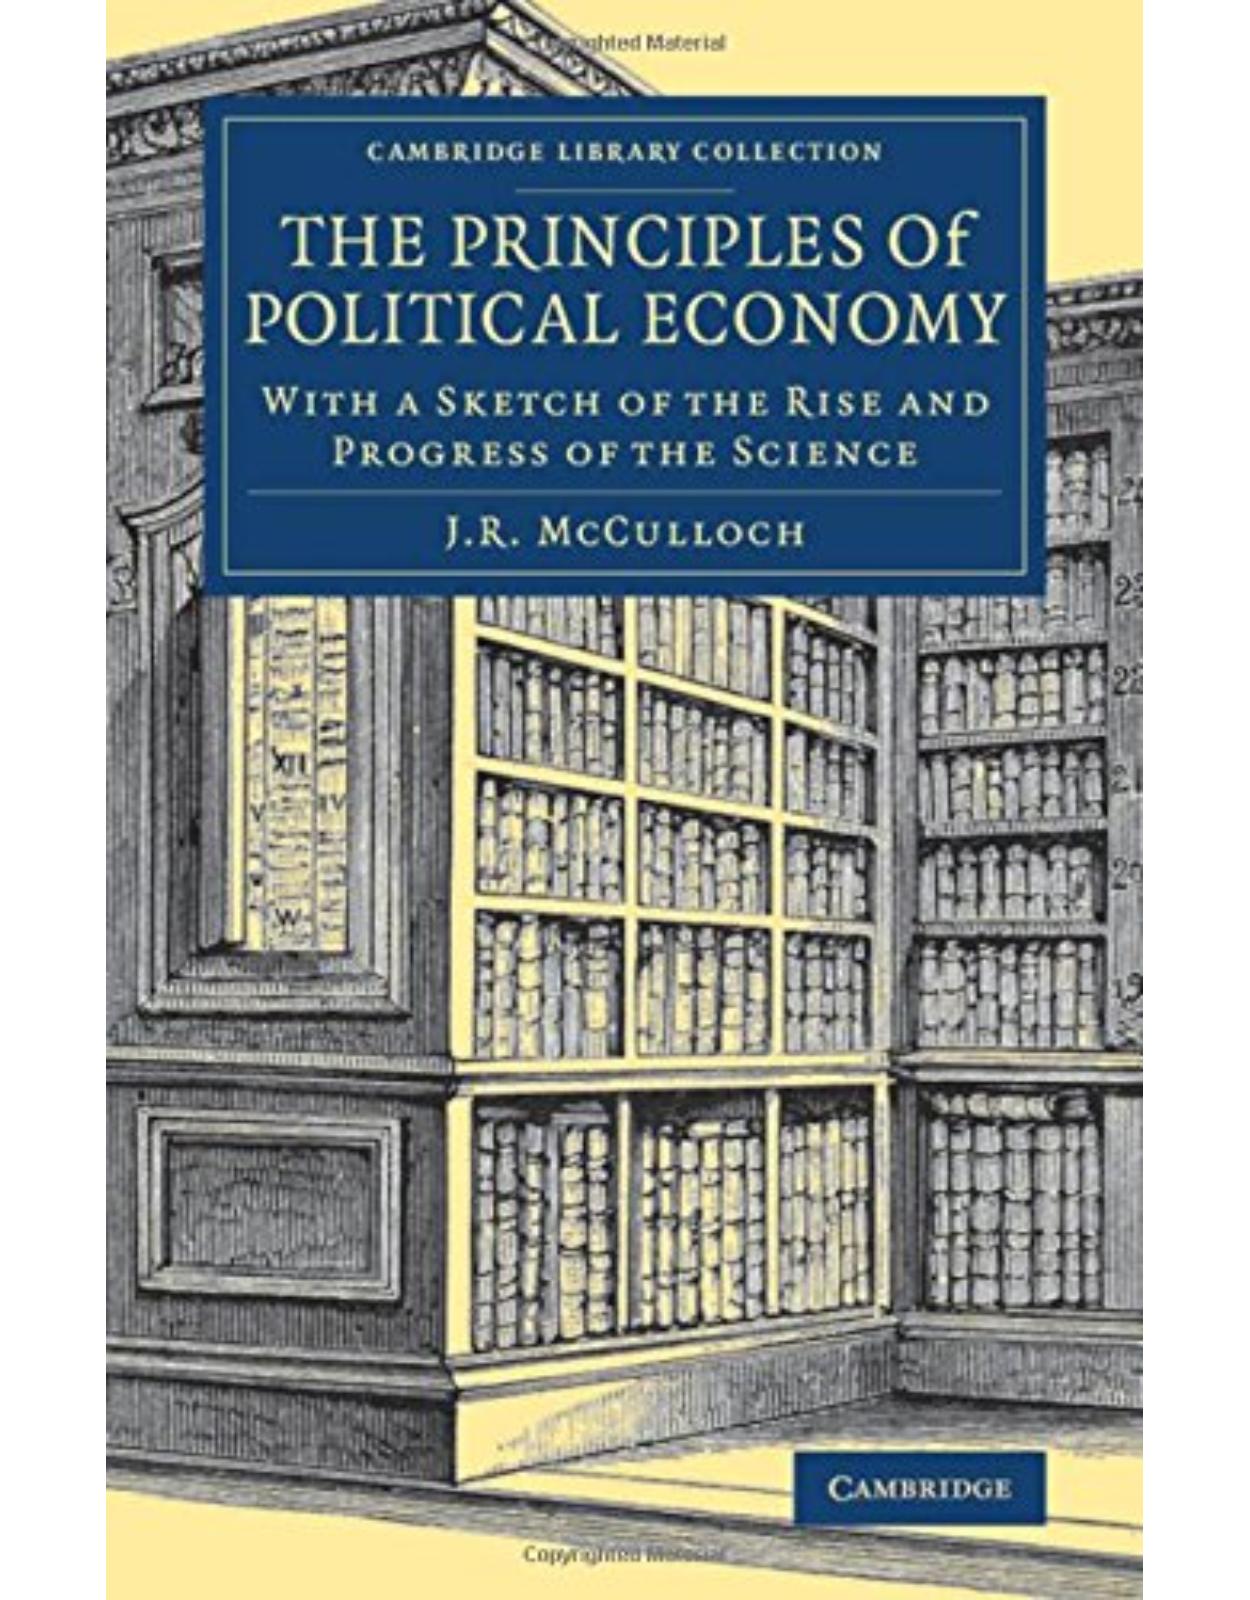 The Principles of Political Economy: With a Sketch of the Rise and Progress of the Science (Cambridge Library Collection - British and Irish History, 19th Century)